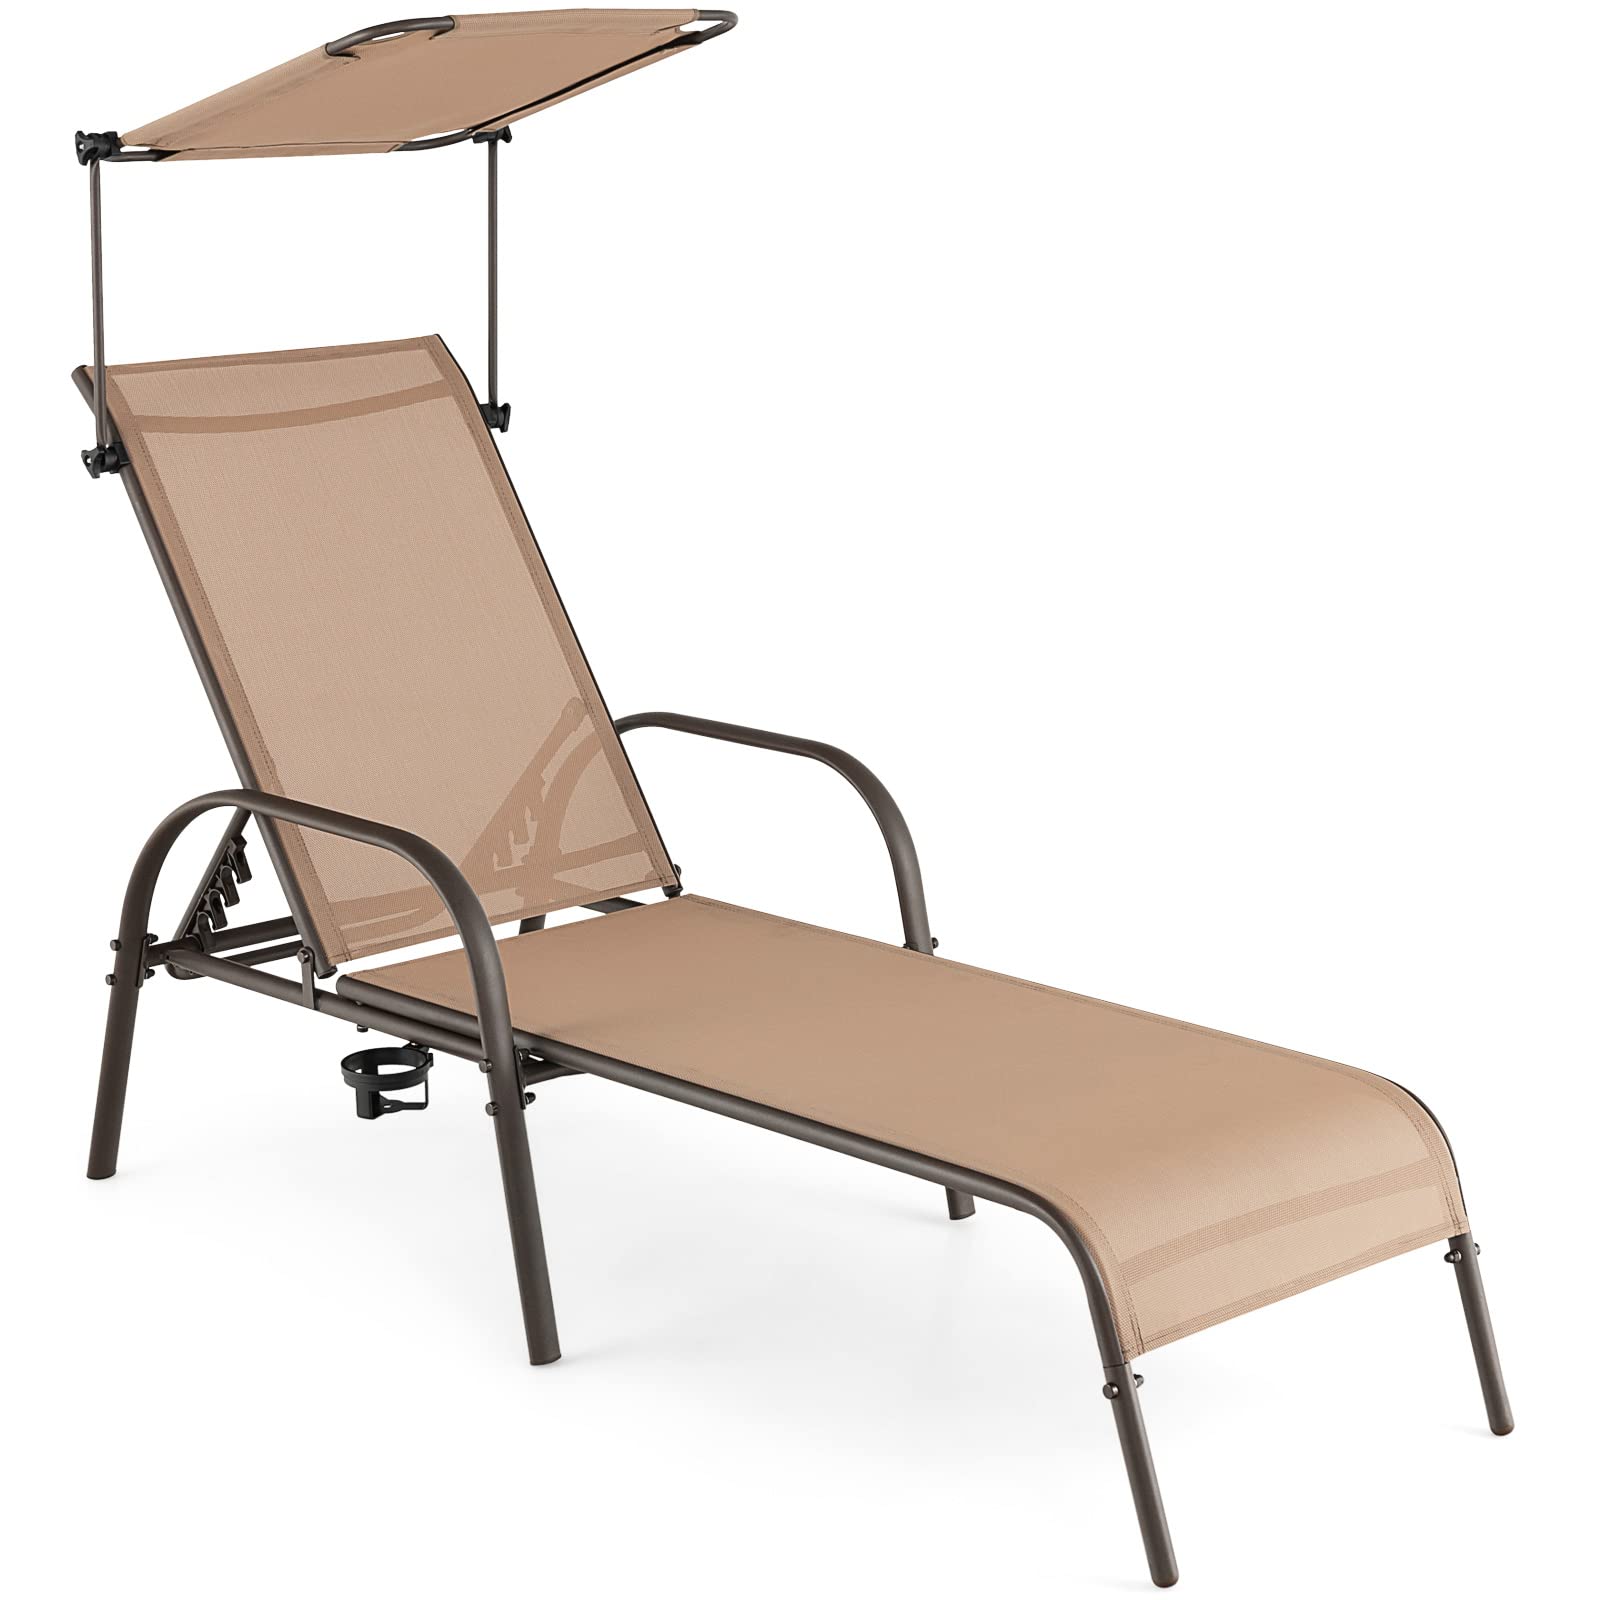 Giantex Patio Chaise Lounge Chair - Outdoor Beach Chair with Adjustable Canopy, Metal Frame Sunbathing Lounger for Outside